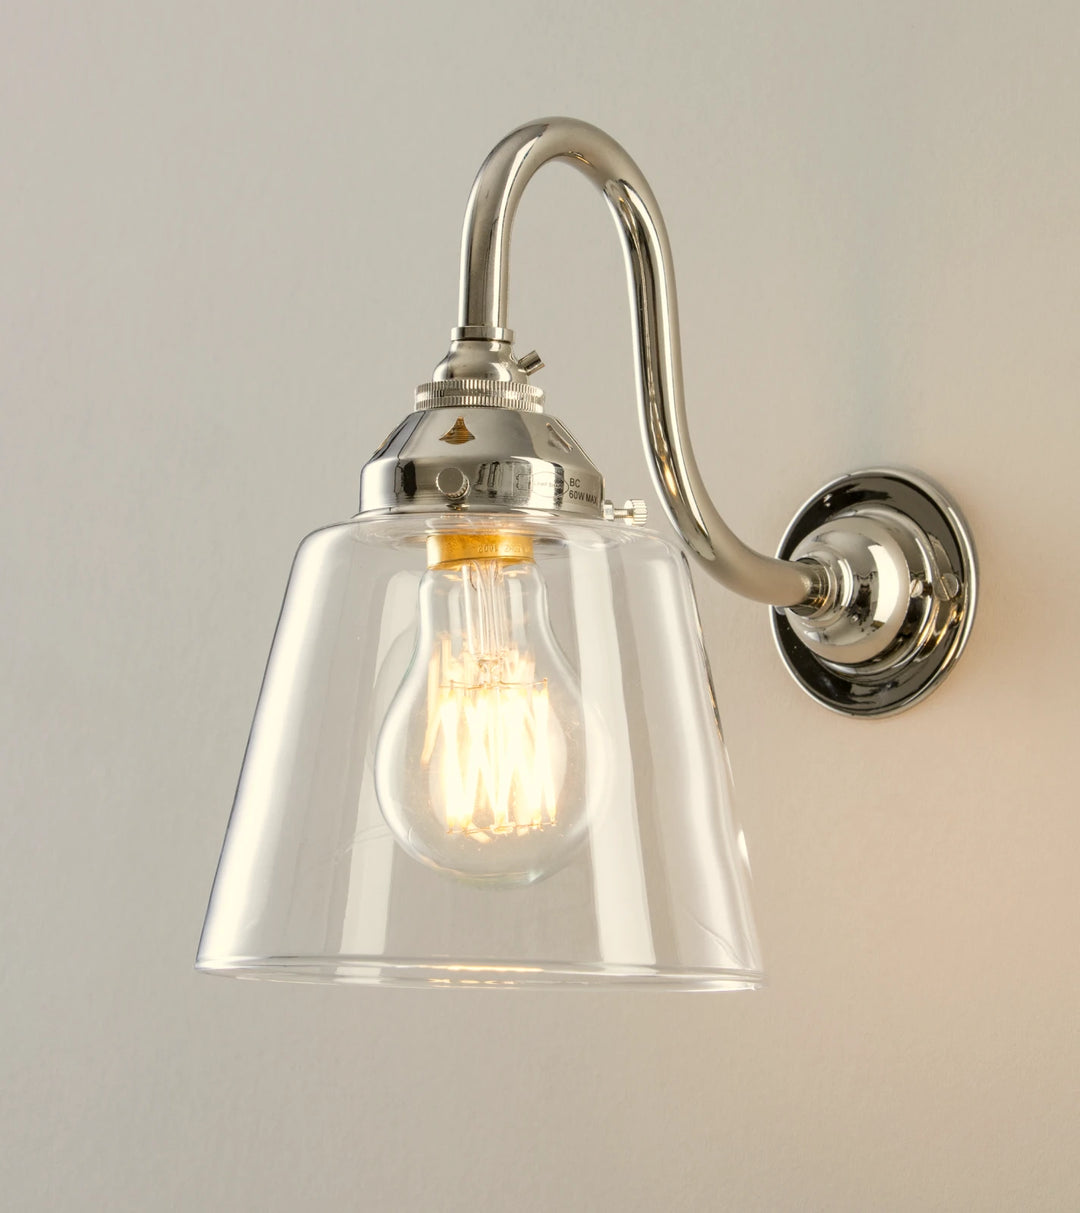 A wall light with a glass shade and a light bulb.